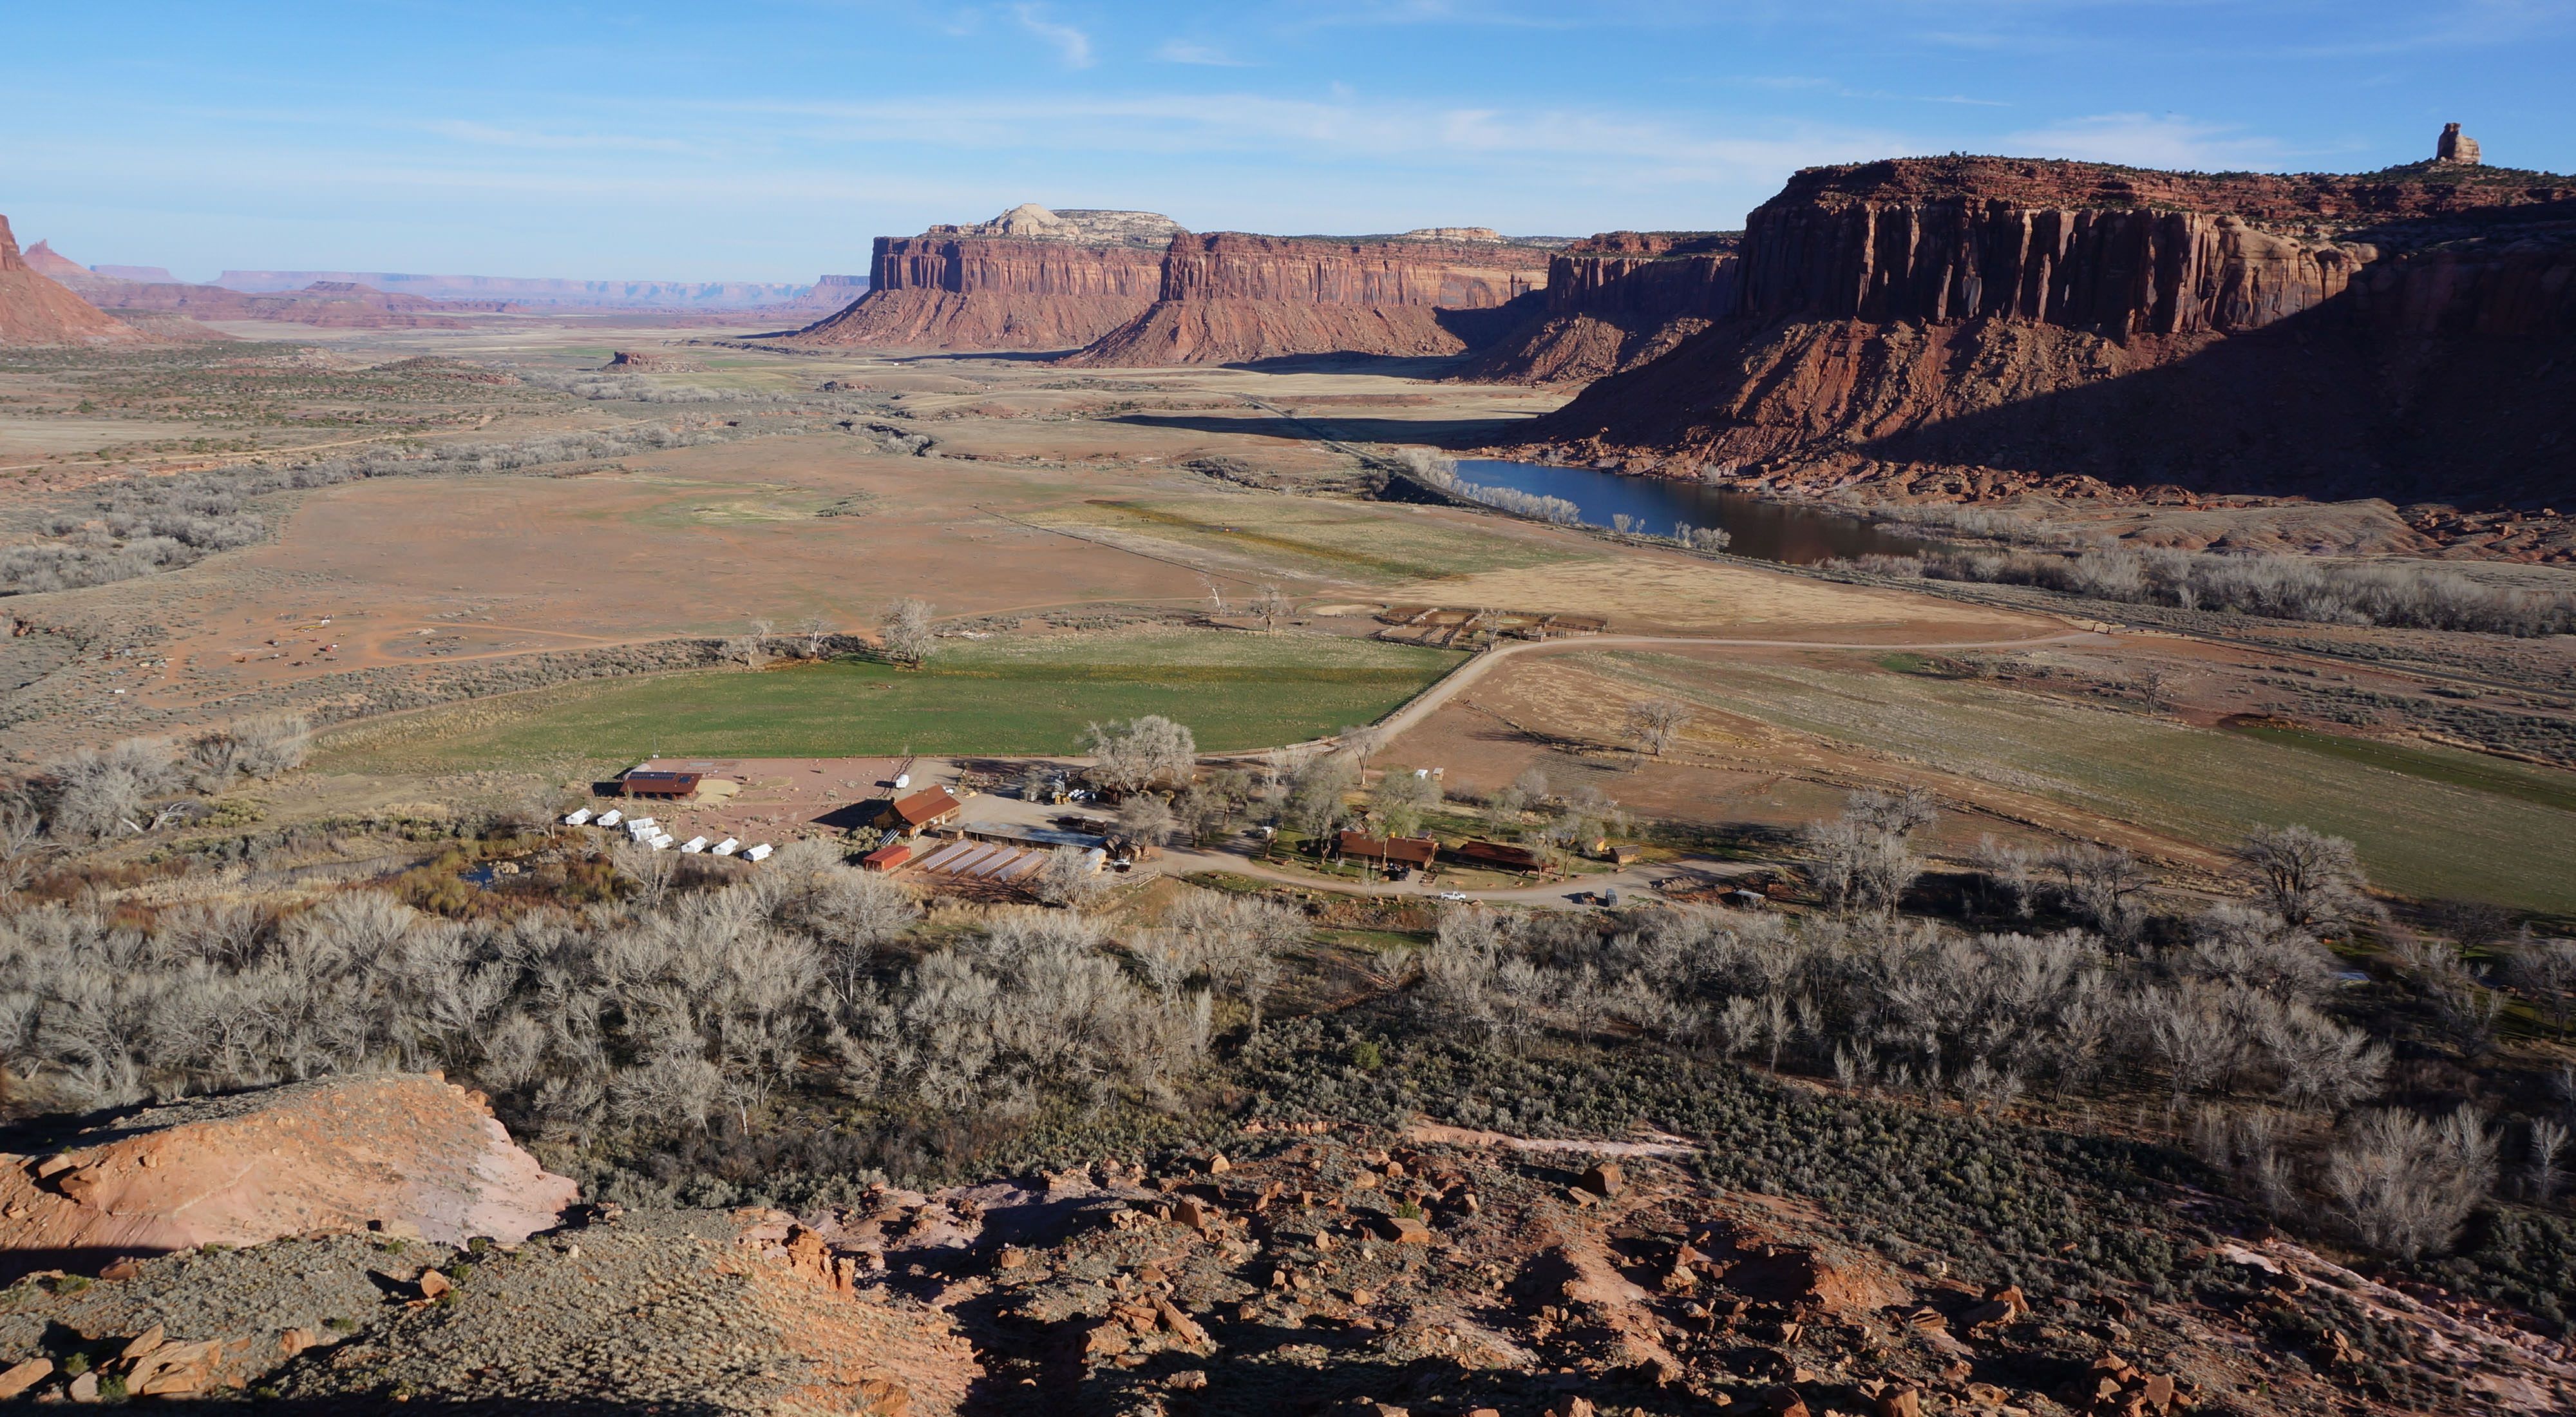 Aerial view of Canyonlands Research Center in a large valley surrounded by red cliffs under blue sky.